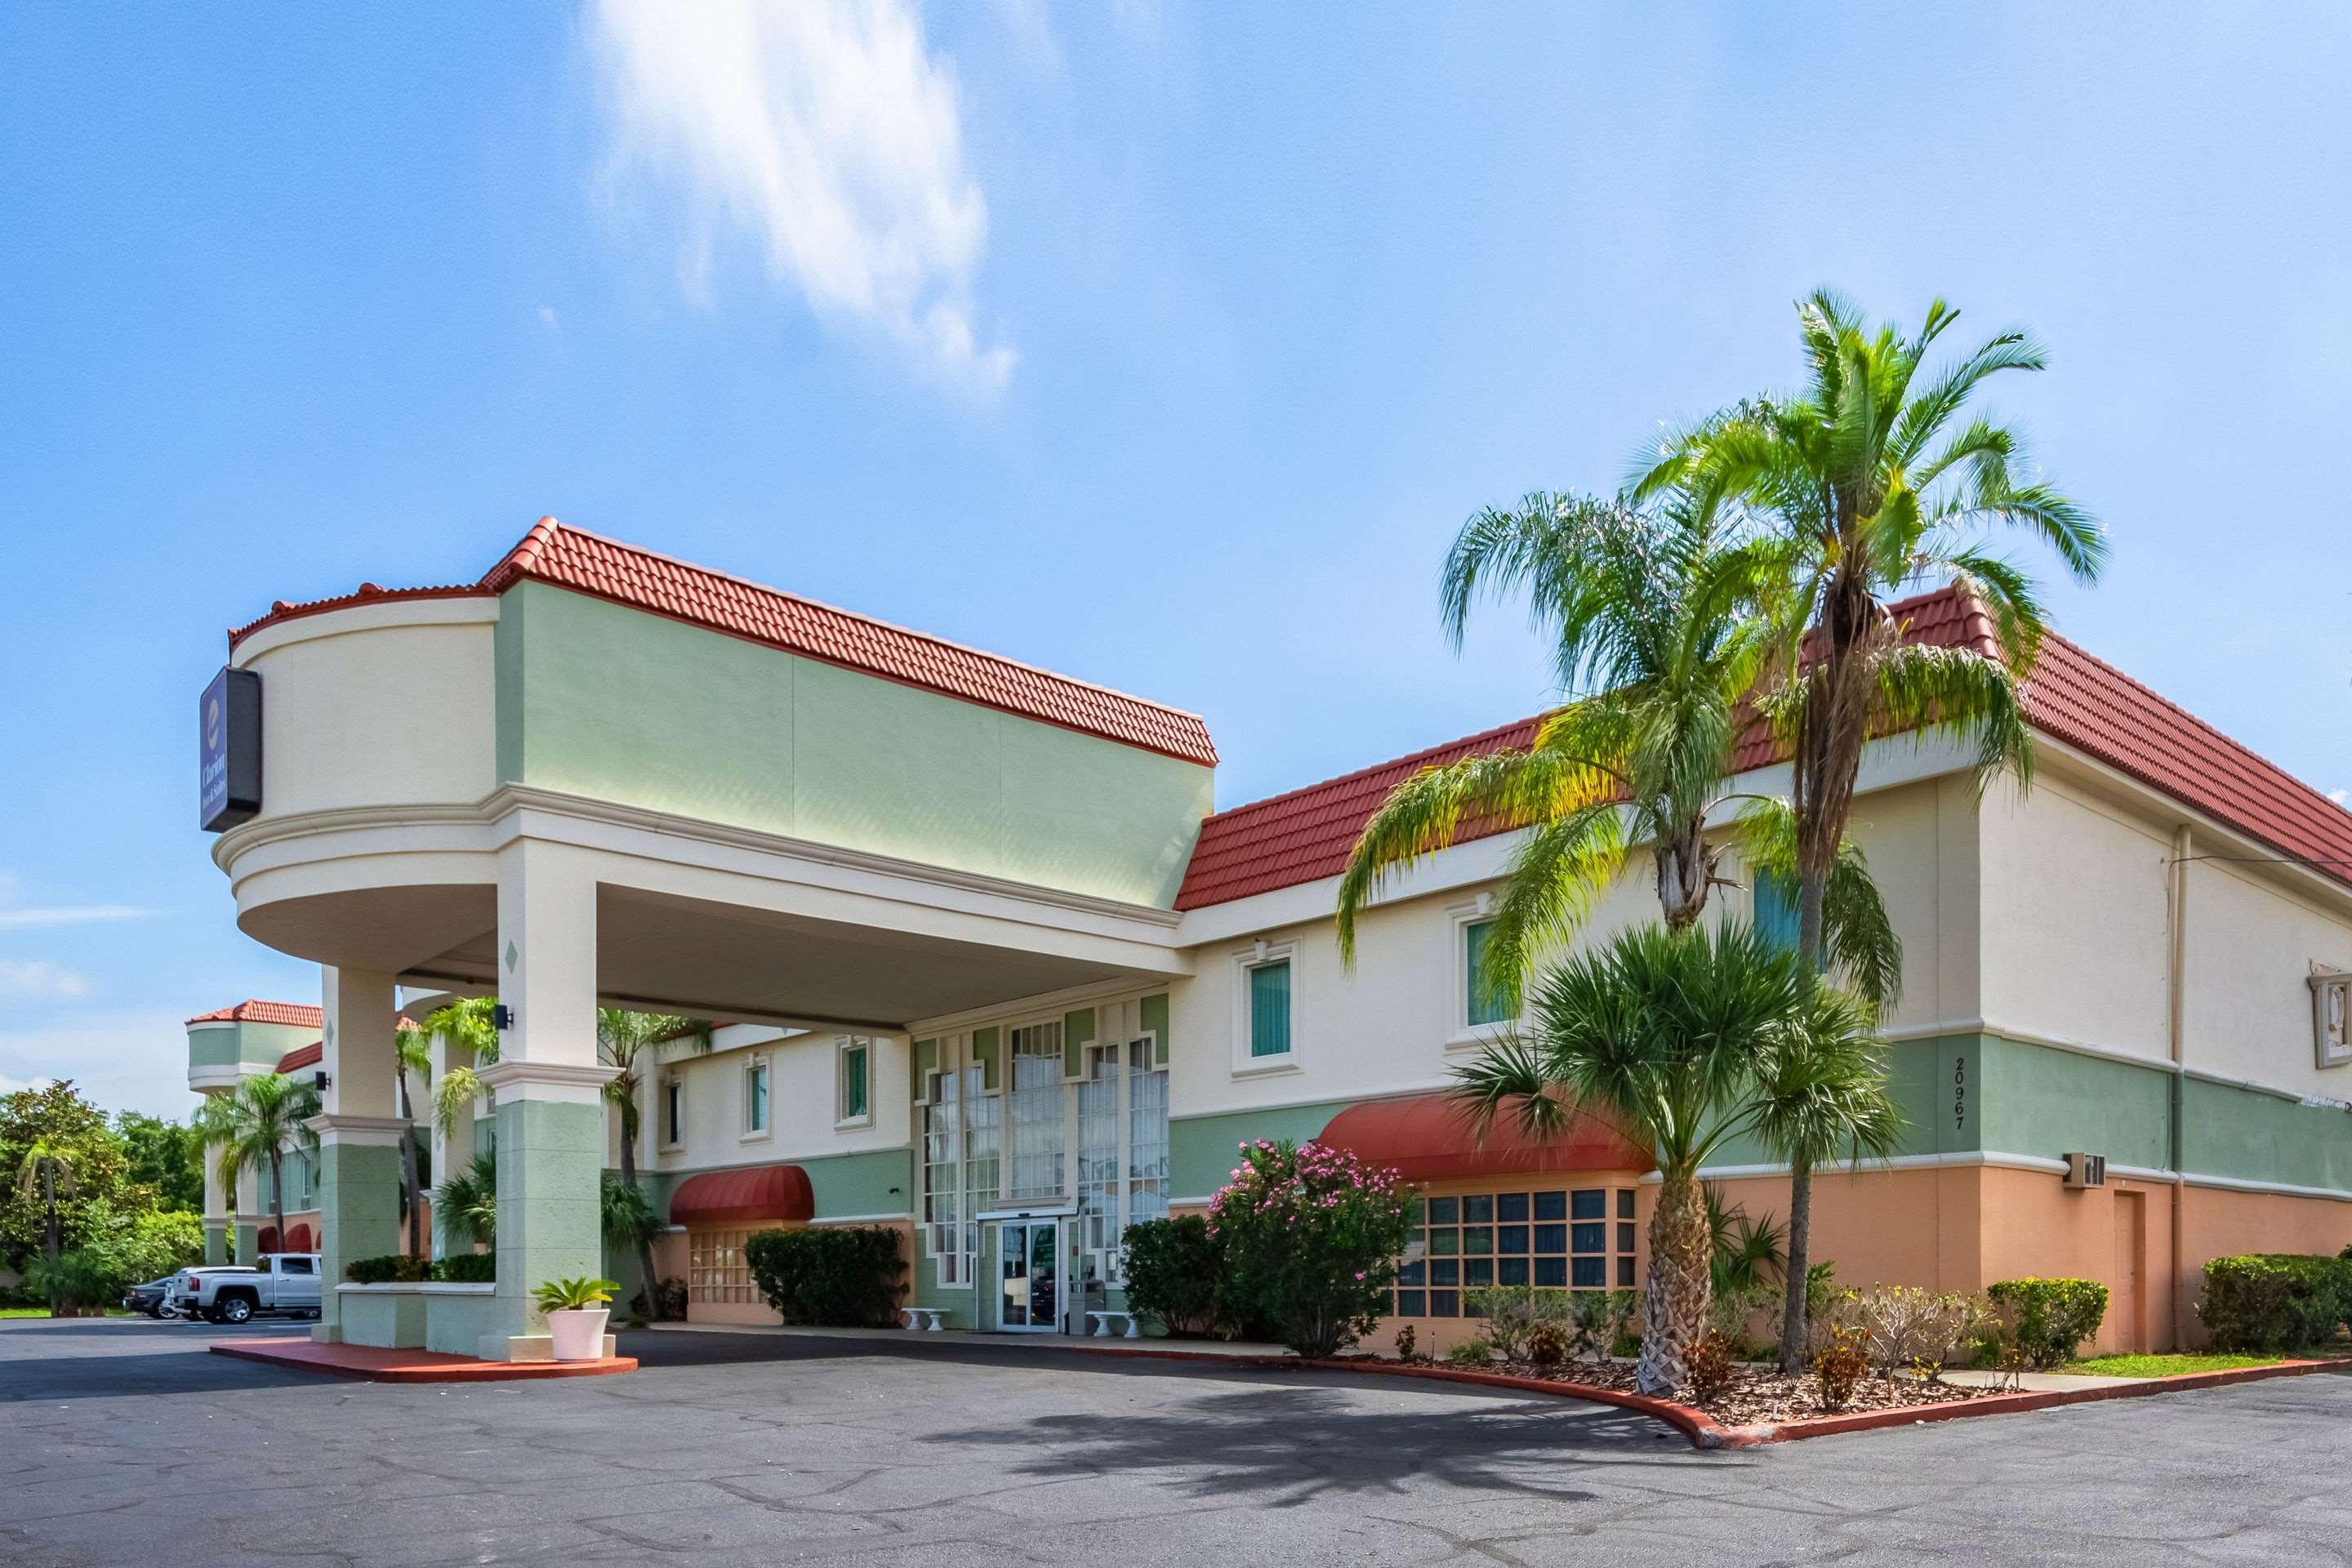 Clarion Inn & Suites Central Clearwater Beach Exterior photo